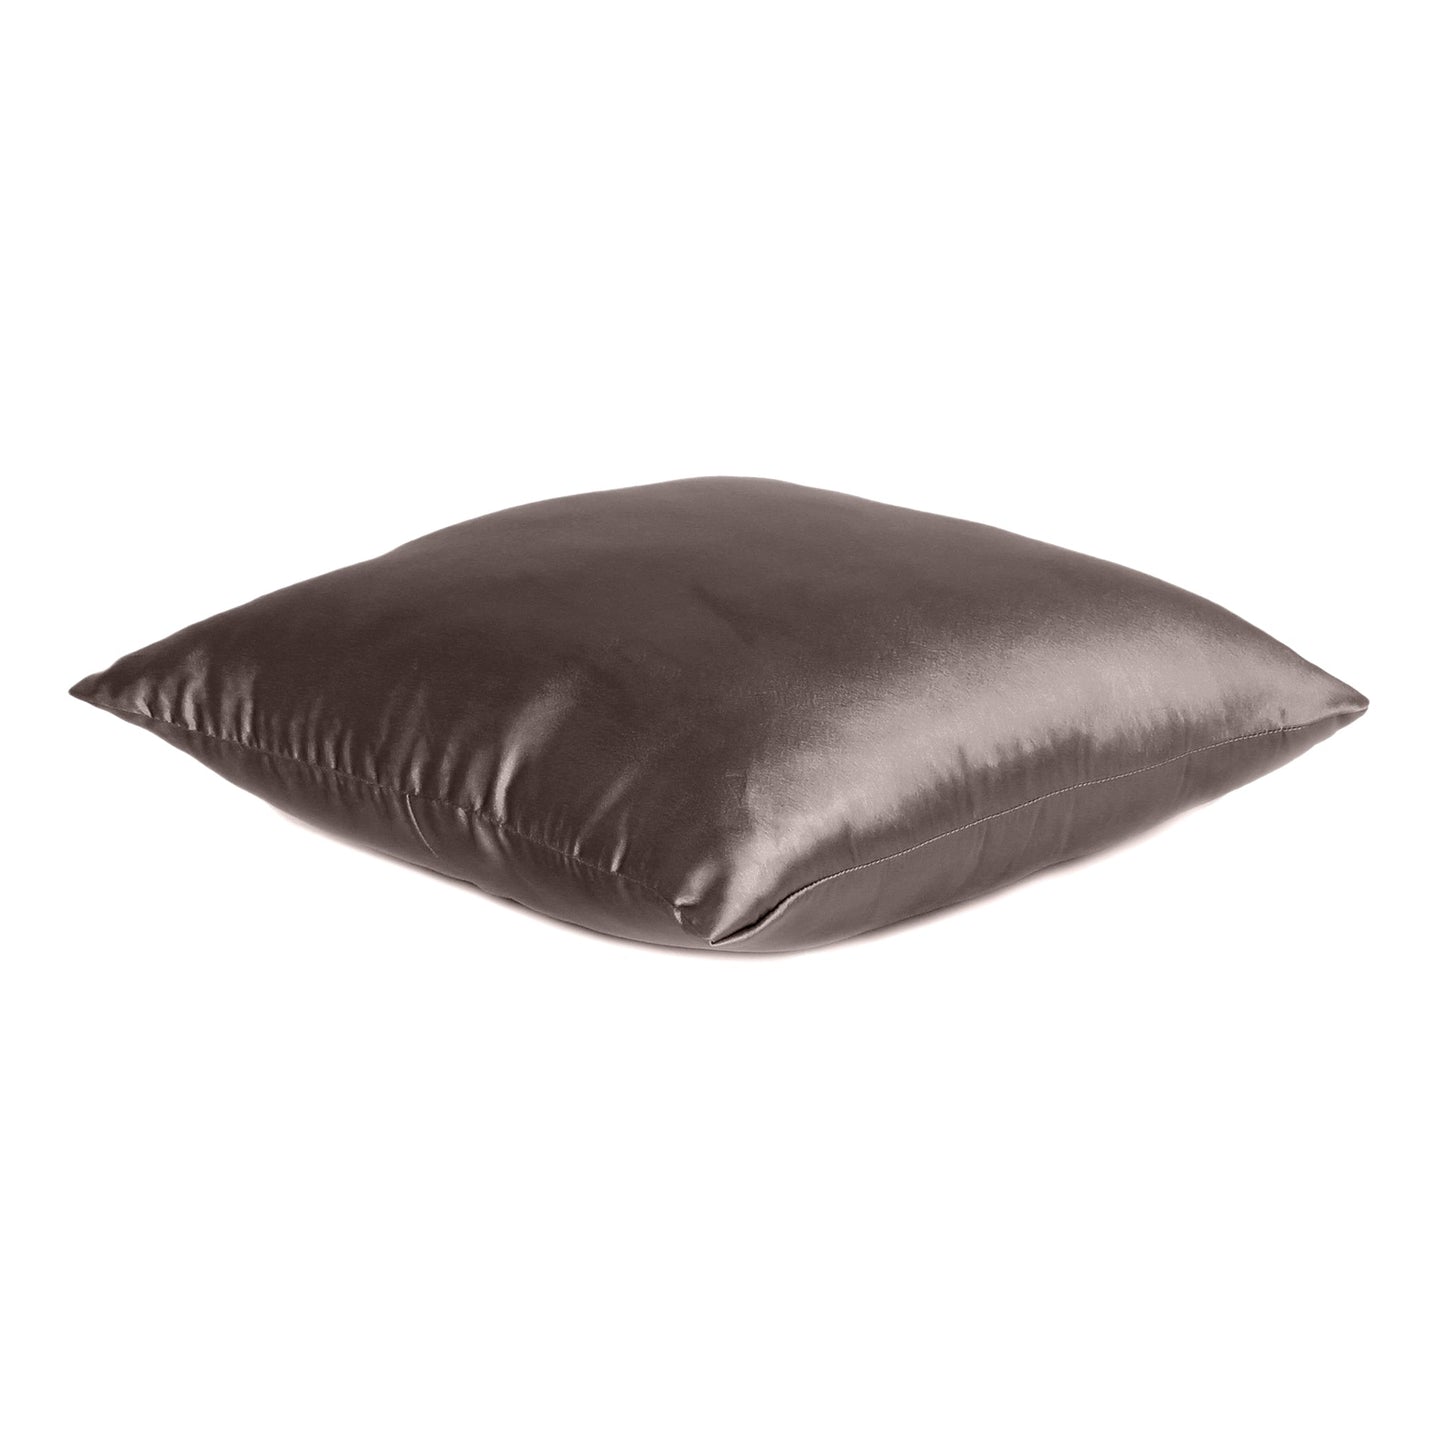 Brunette Brown Satin Silky Cushion Covers in Set of 2